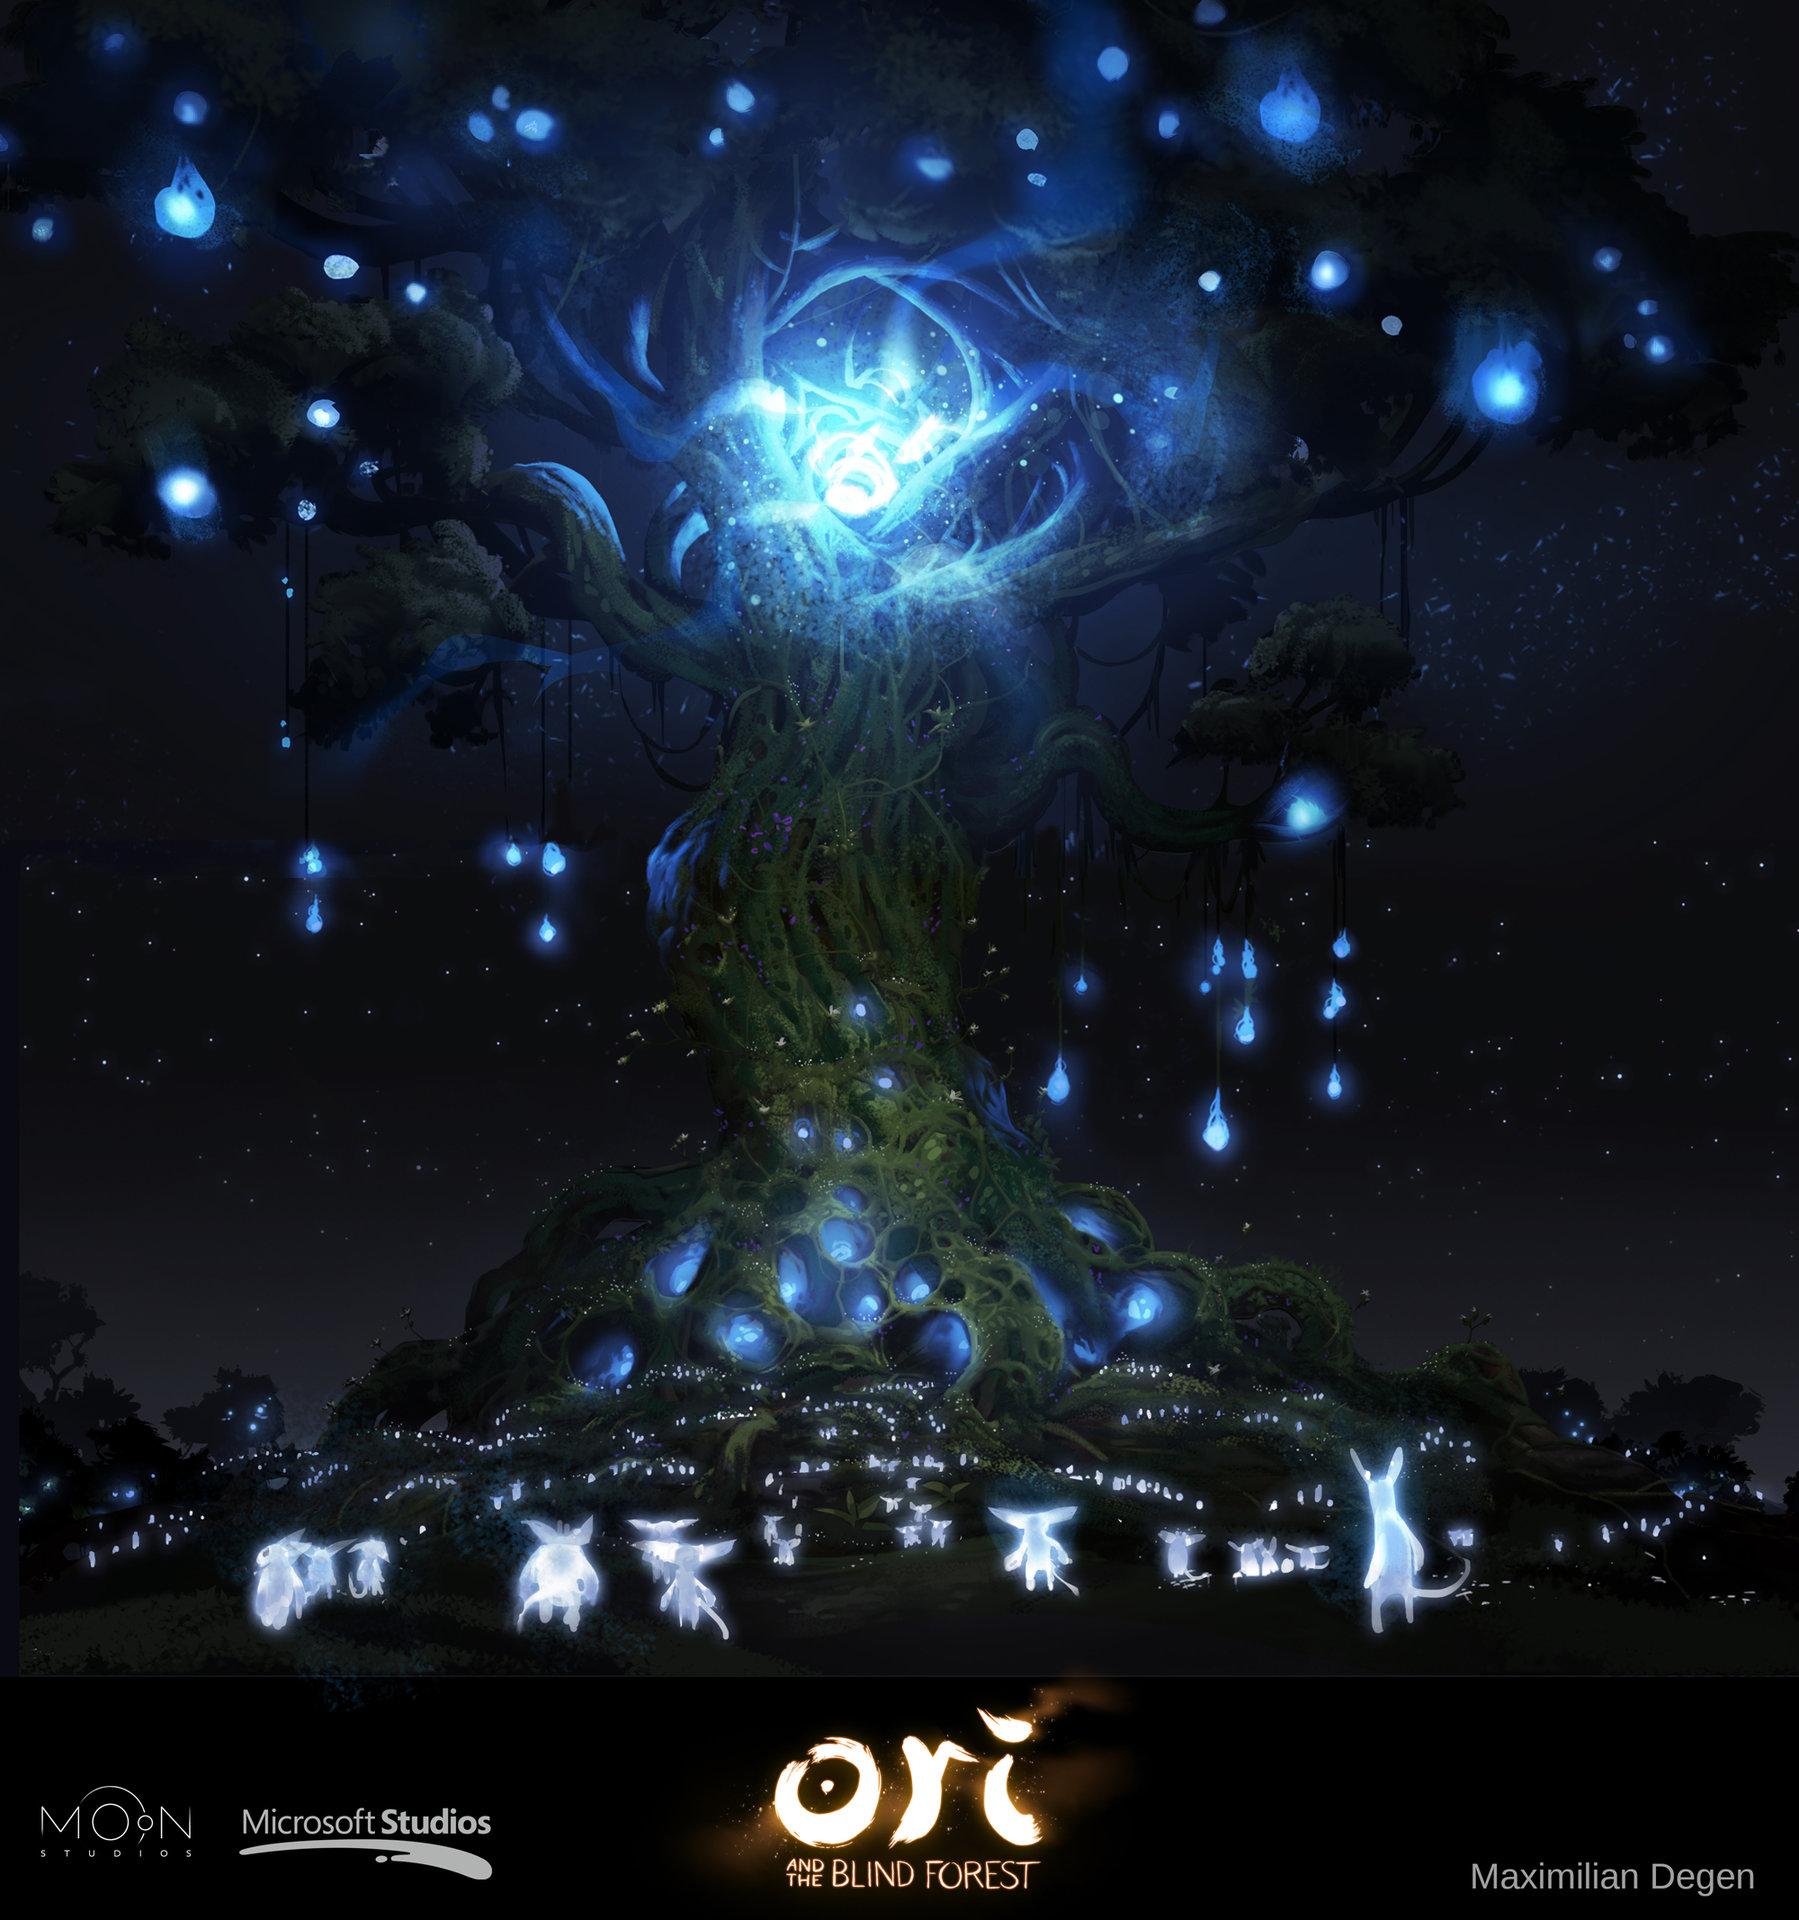 Картинки ori and the blind forest картинки